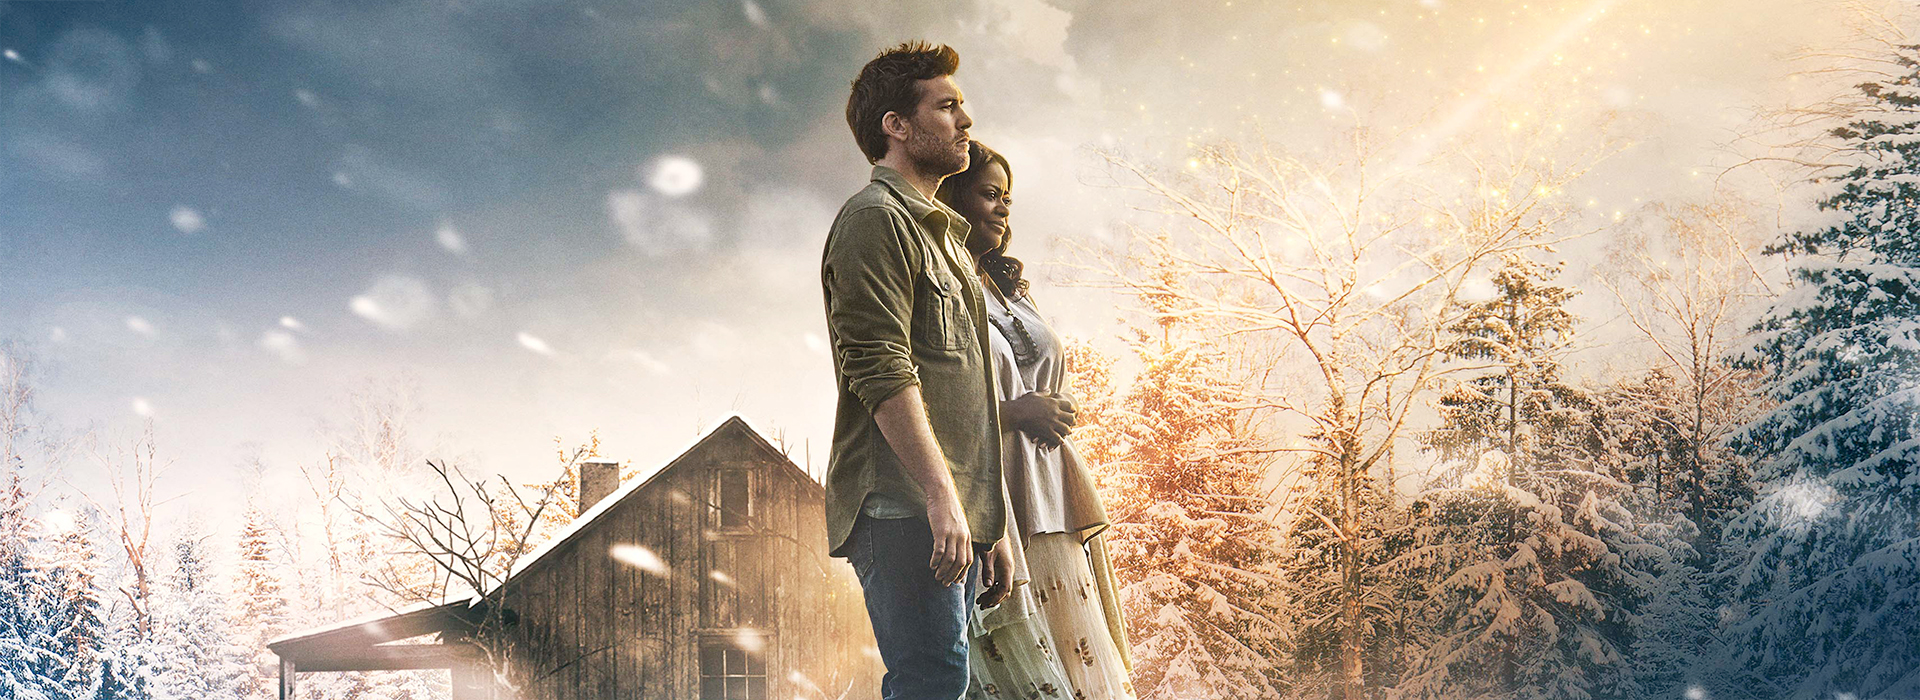 Movie poster The Shack